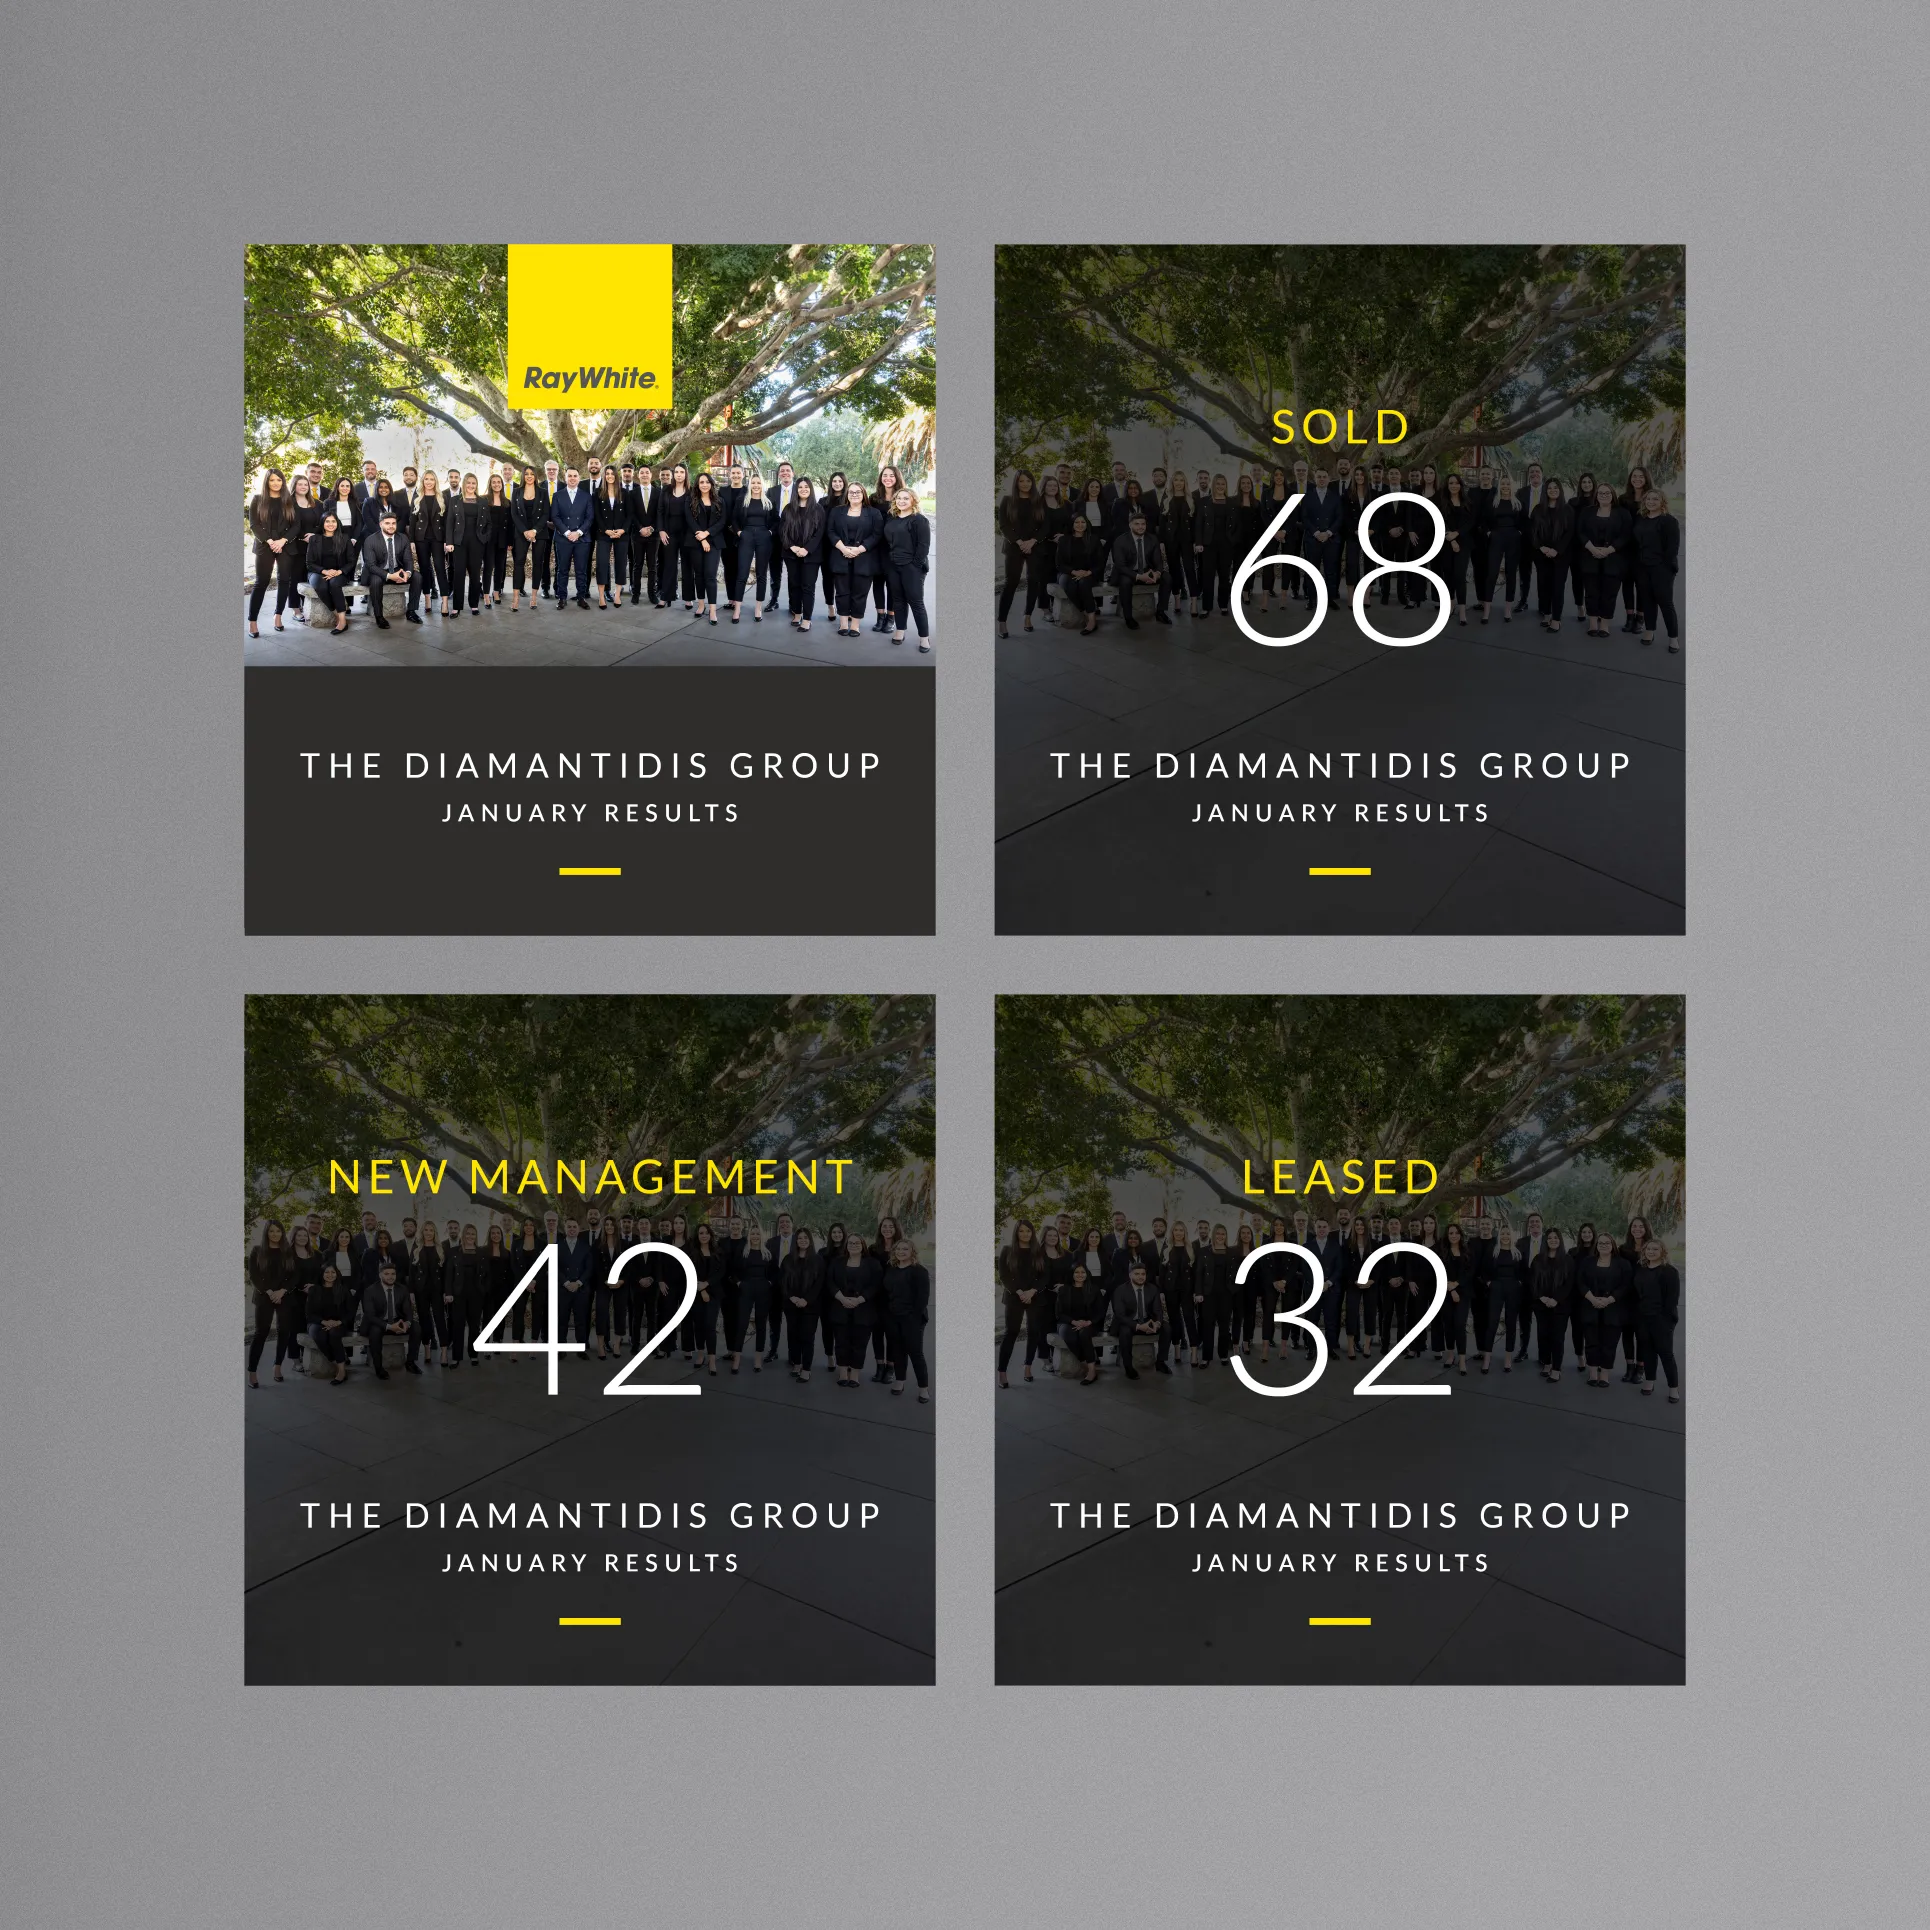 Social media content created for Ray White Diamantidis Group by Oneday Design Group